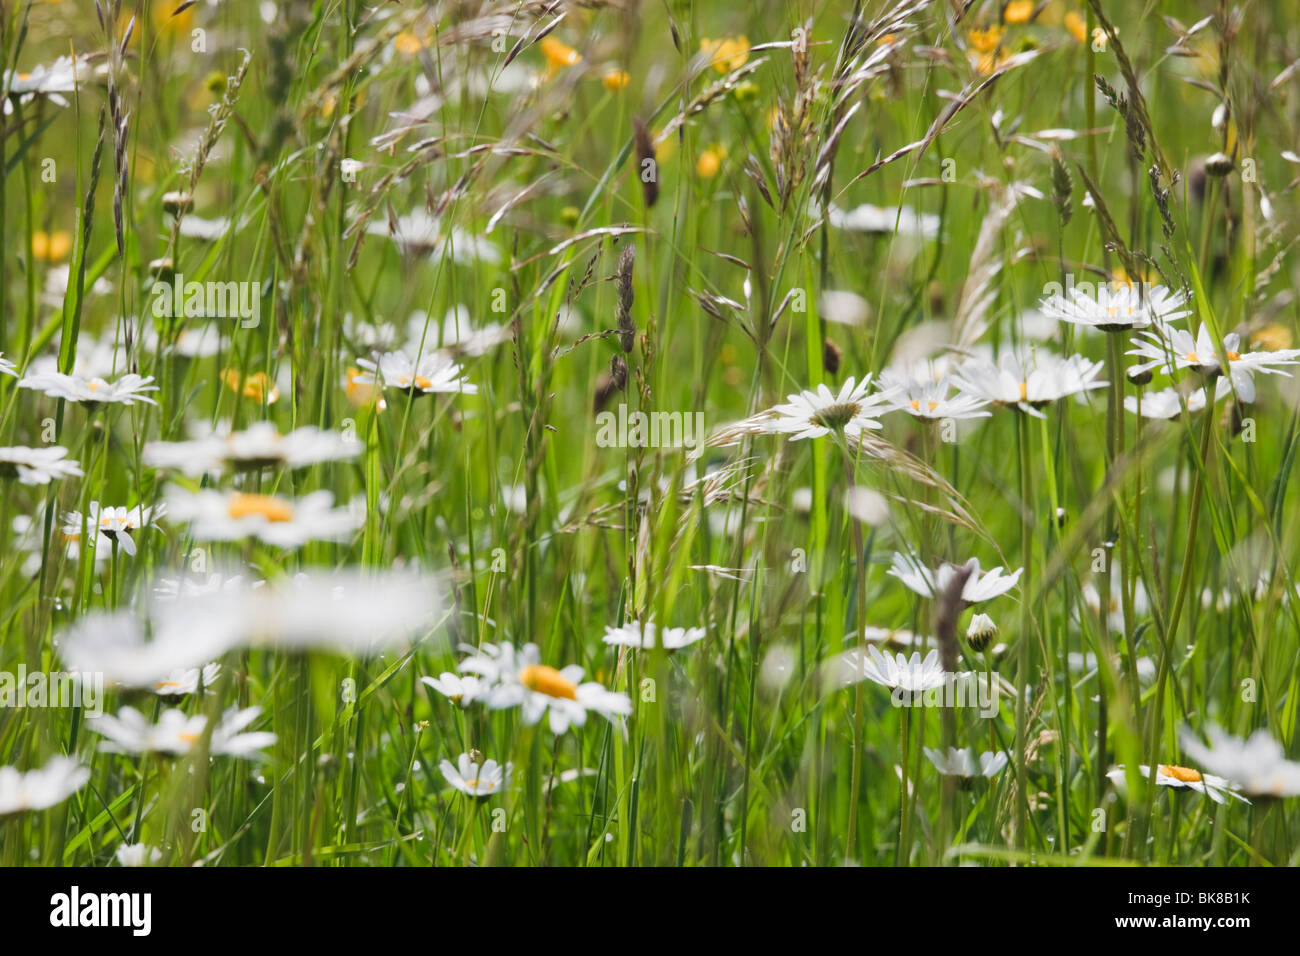 Europe. Ox-eye Daisies (Leucanthemum vulgare) growing with wild grasses in a wildflower meadow Stock Photo